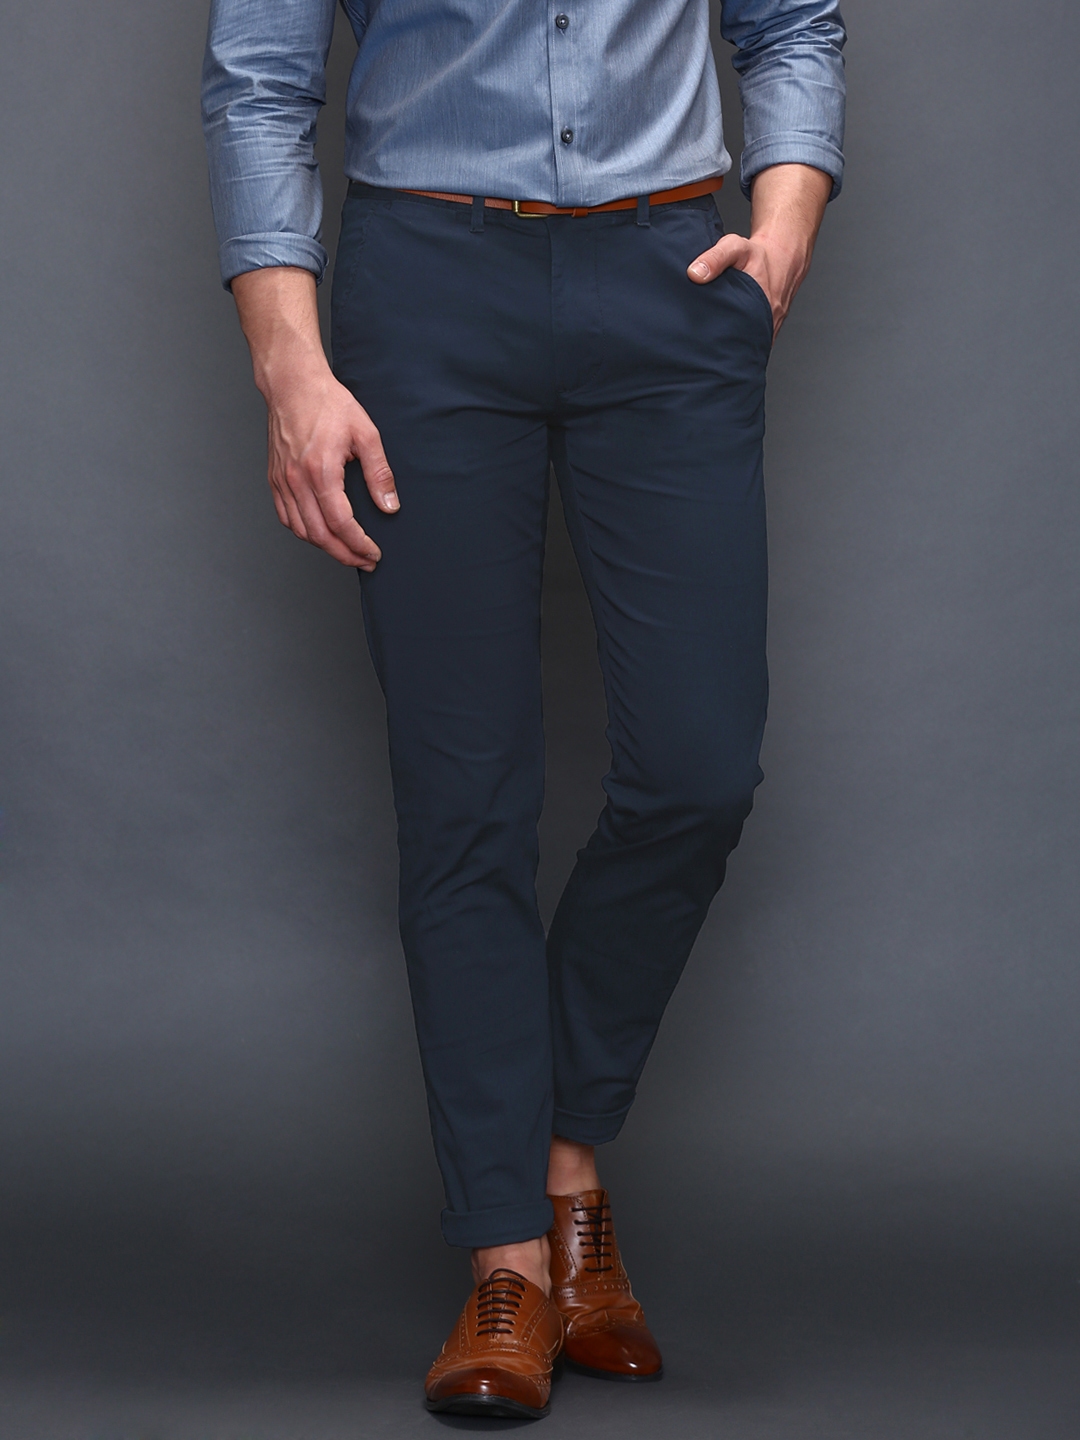 Buy SELECTED Navy Slim Casual Trousers - Trousers for Men 1208114 | Myntra